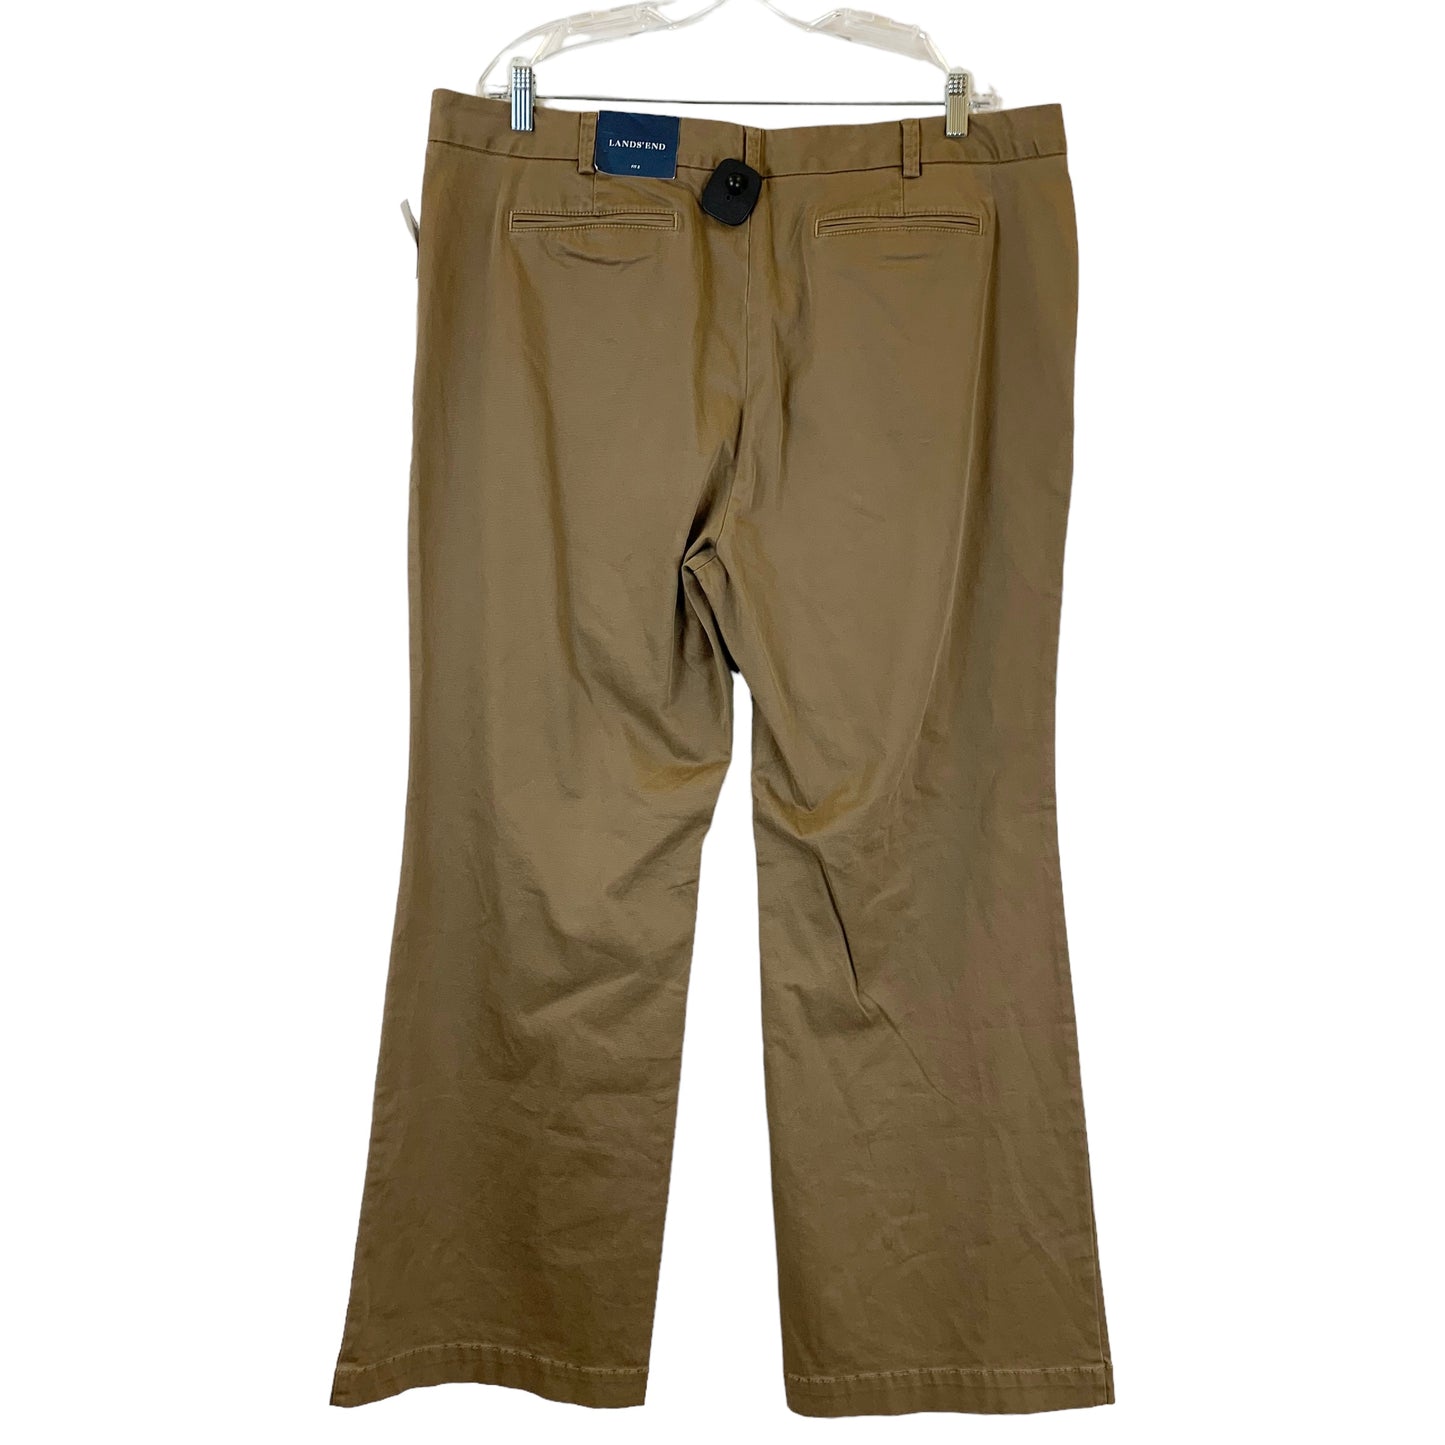 Pants Ankle By Lands End  Size: 18